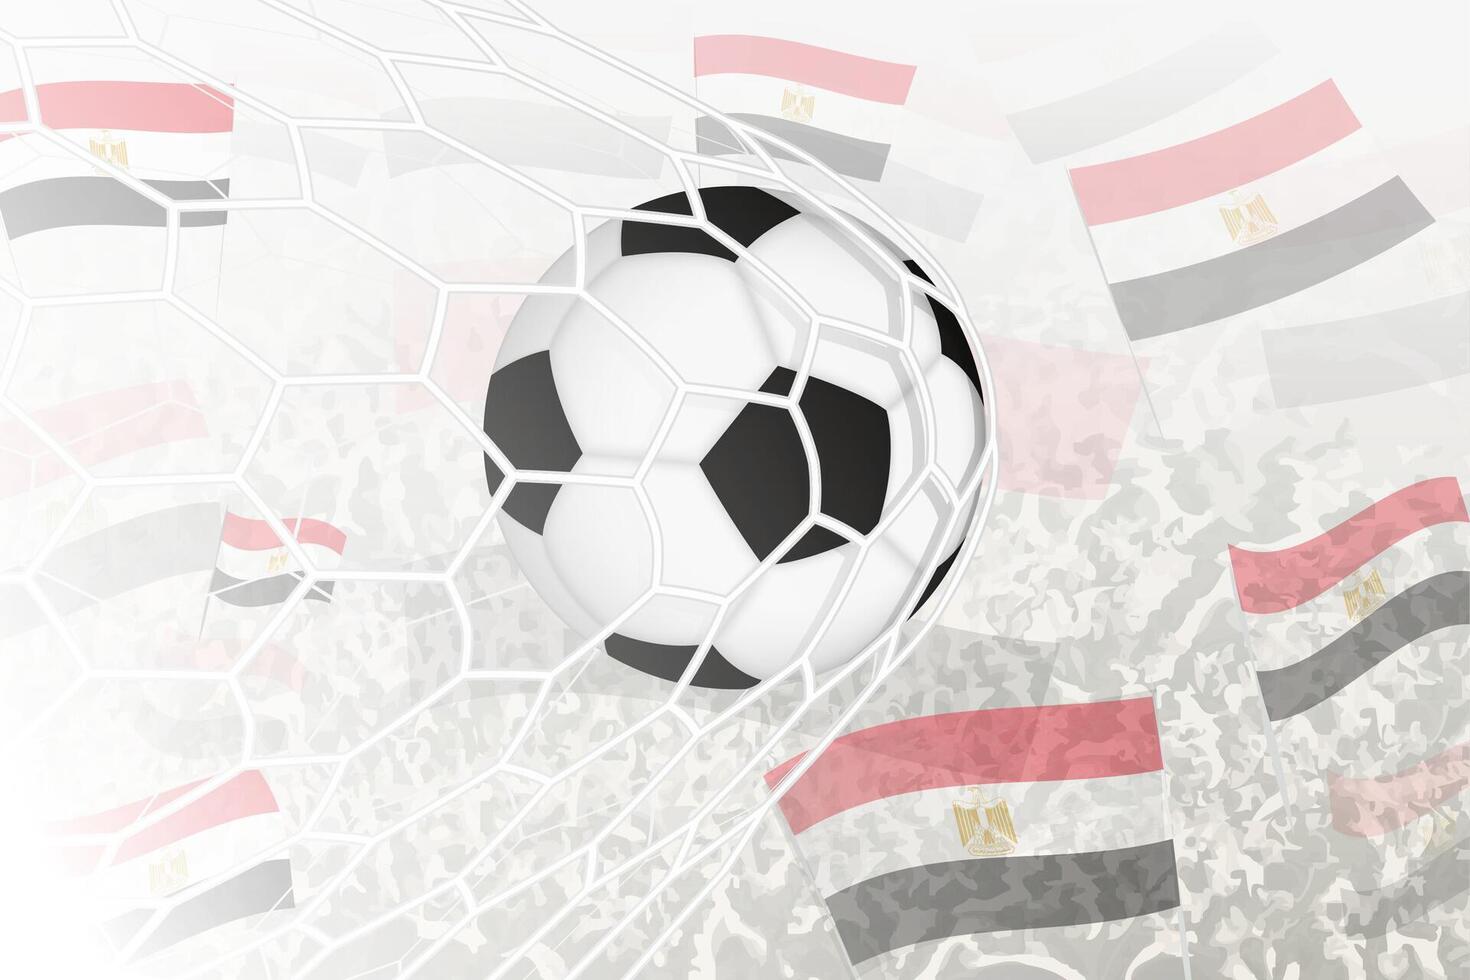 National Football team of Egypt scored goal. Ball in goal net, while football supporters are waving the Egypt flag in the background. vector